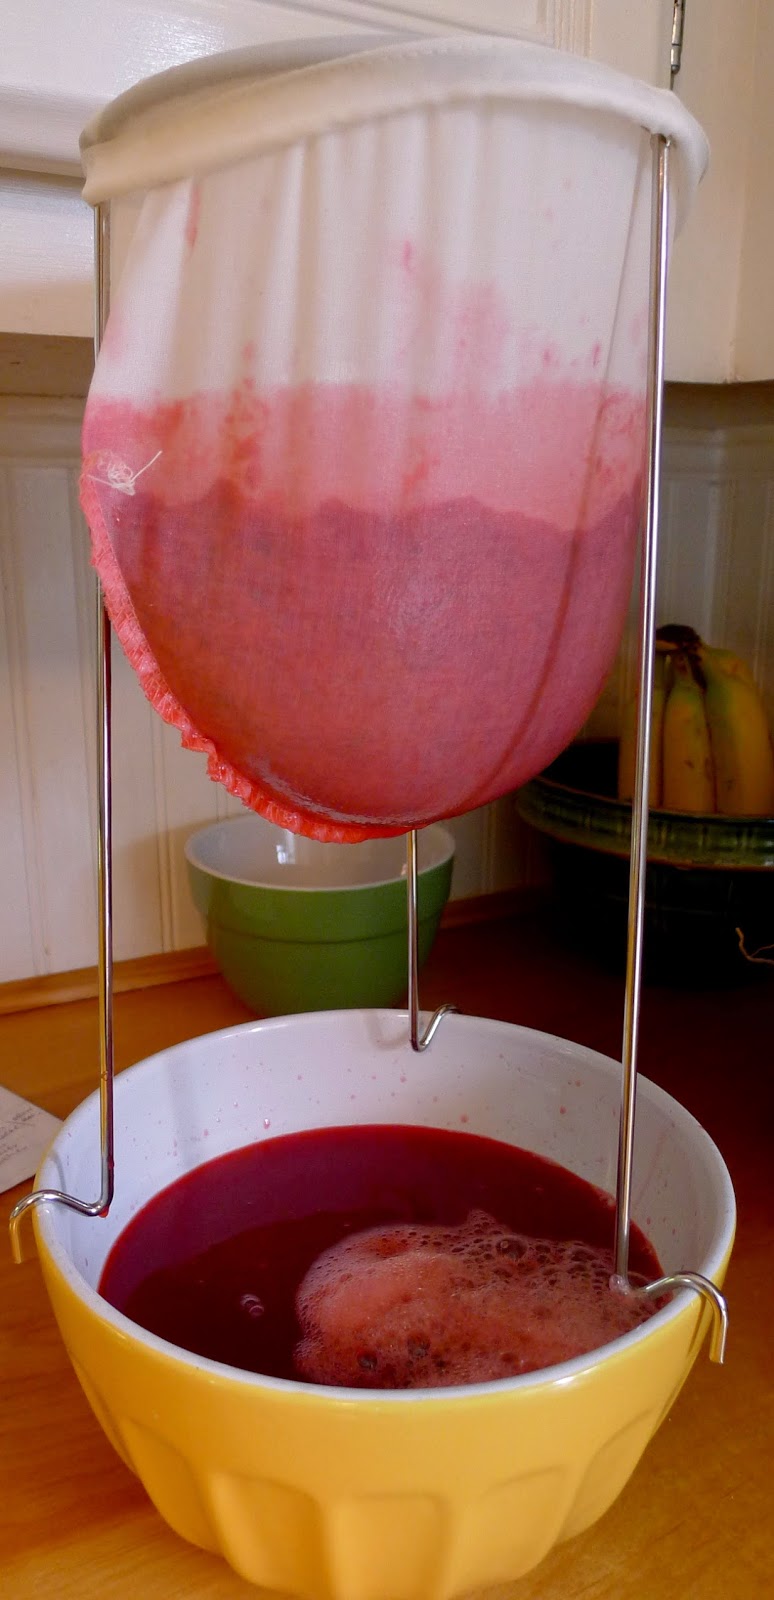 Red currant jelly, jelly bag